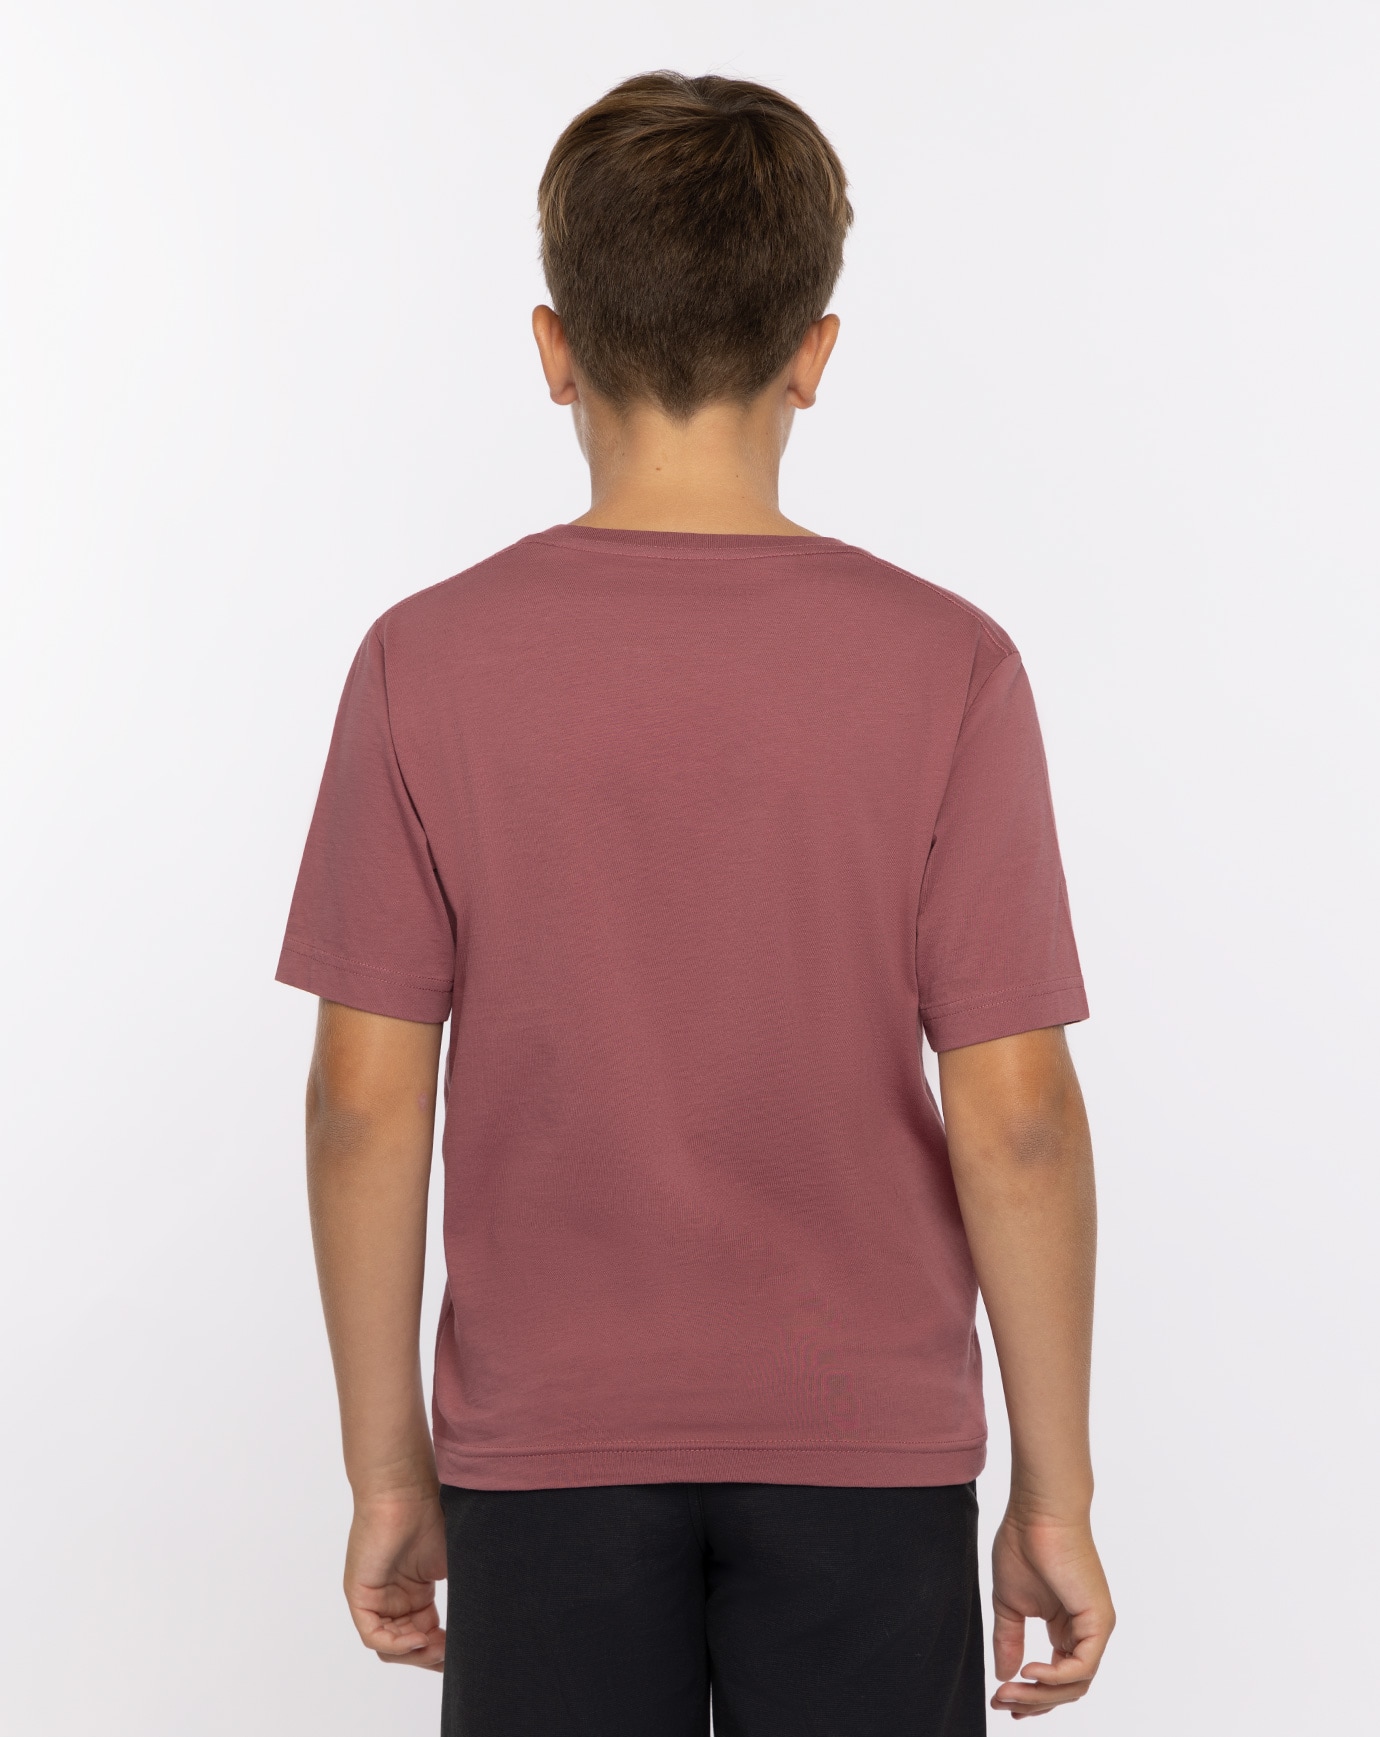 REED RUNNER YOUTH TEE Image 3